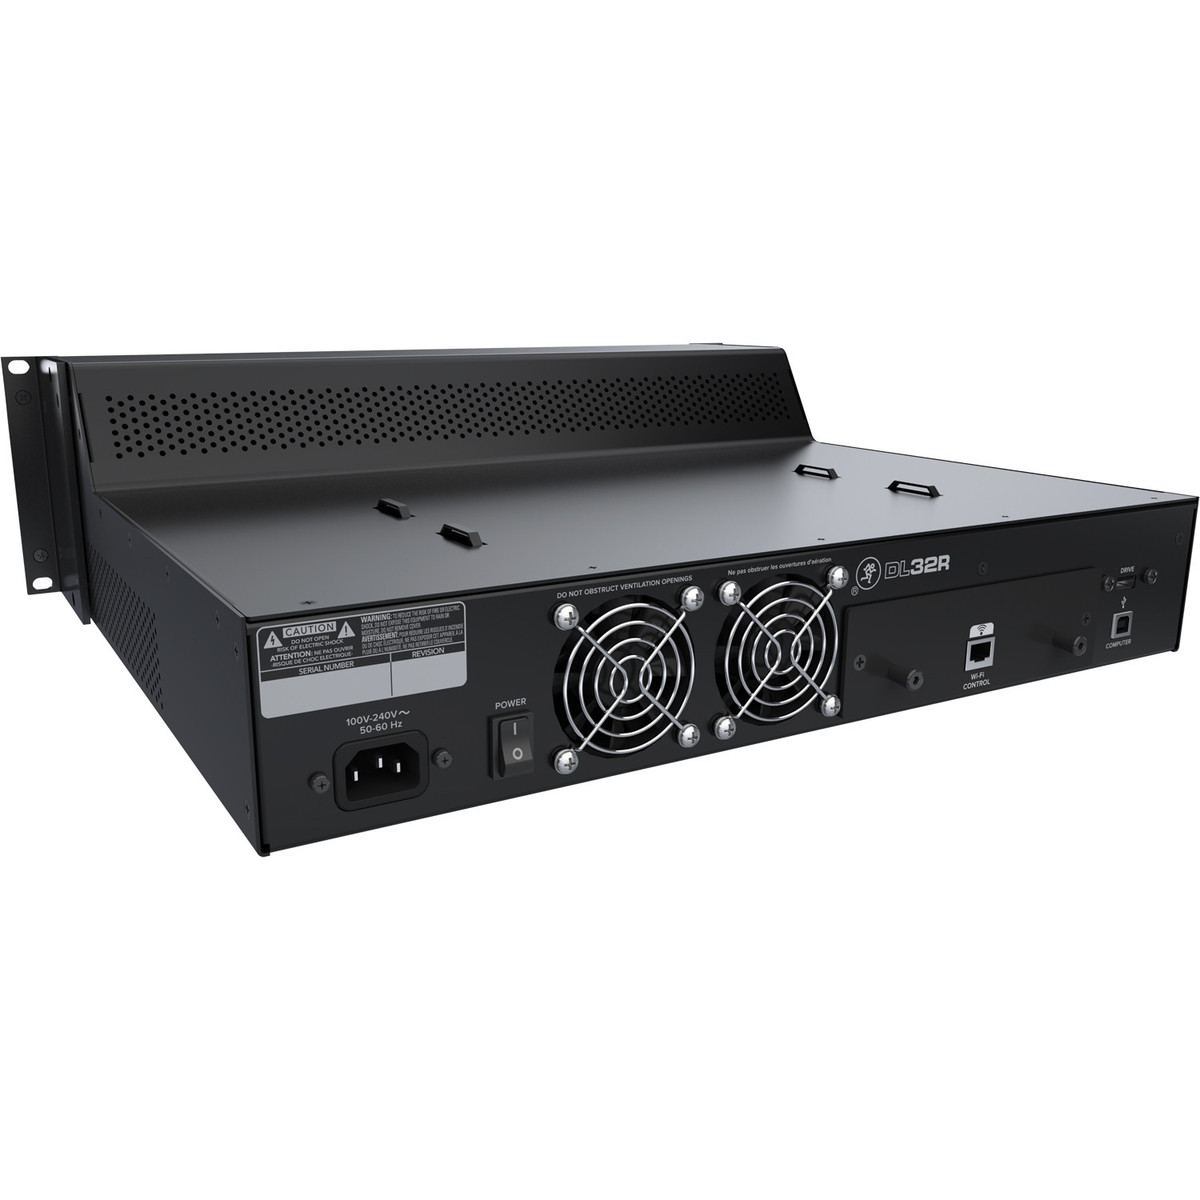 Mackie Dl32r Pour Ipad - Opnemer in rack - Variation 4